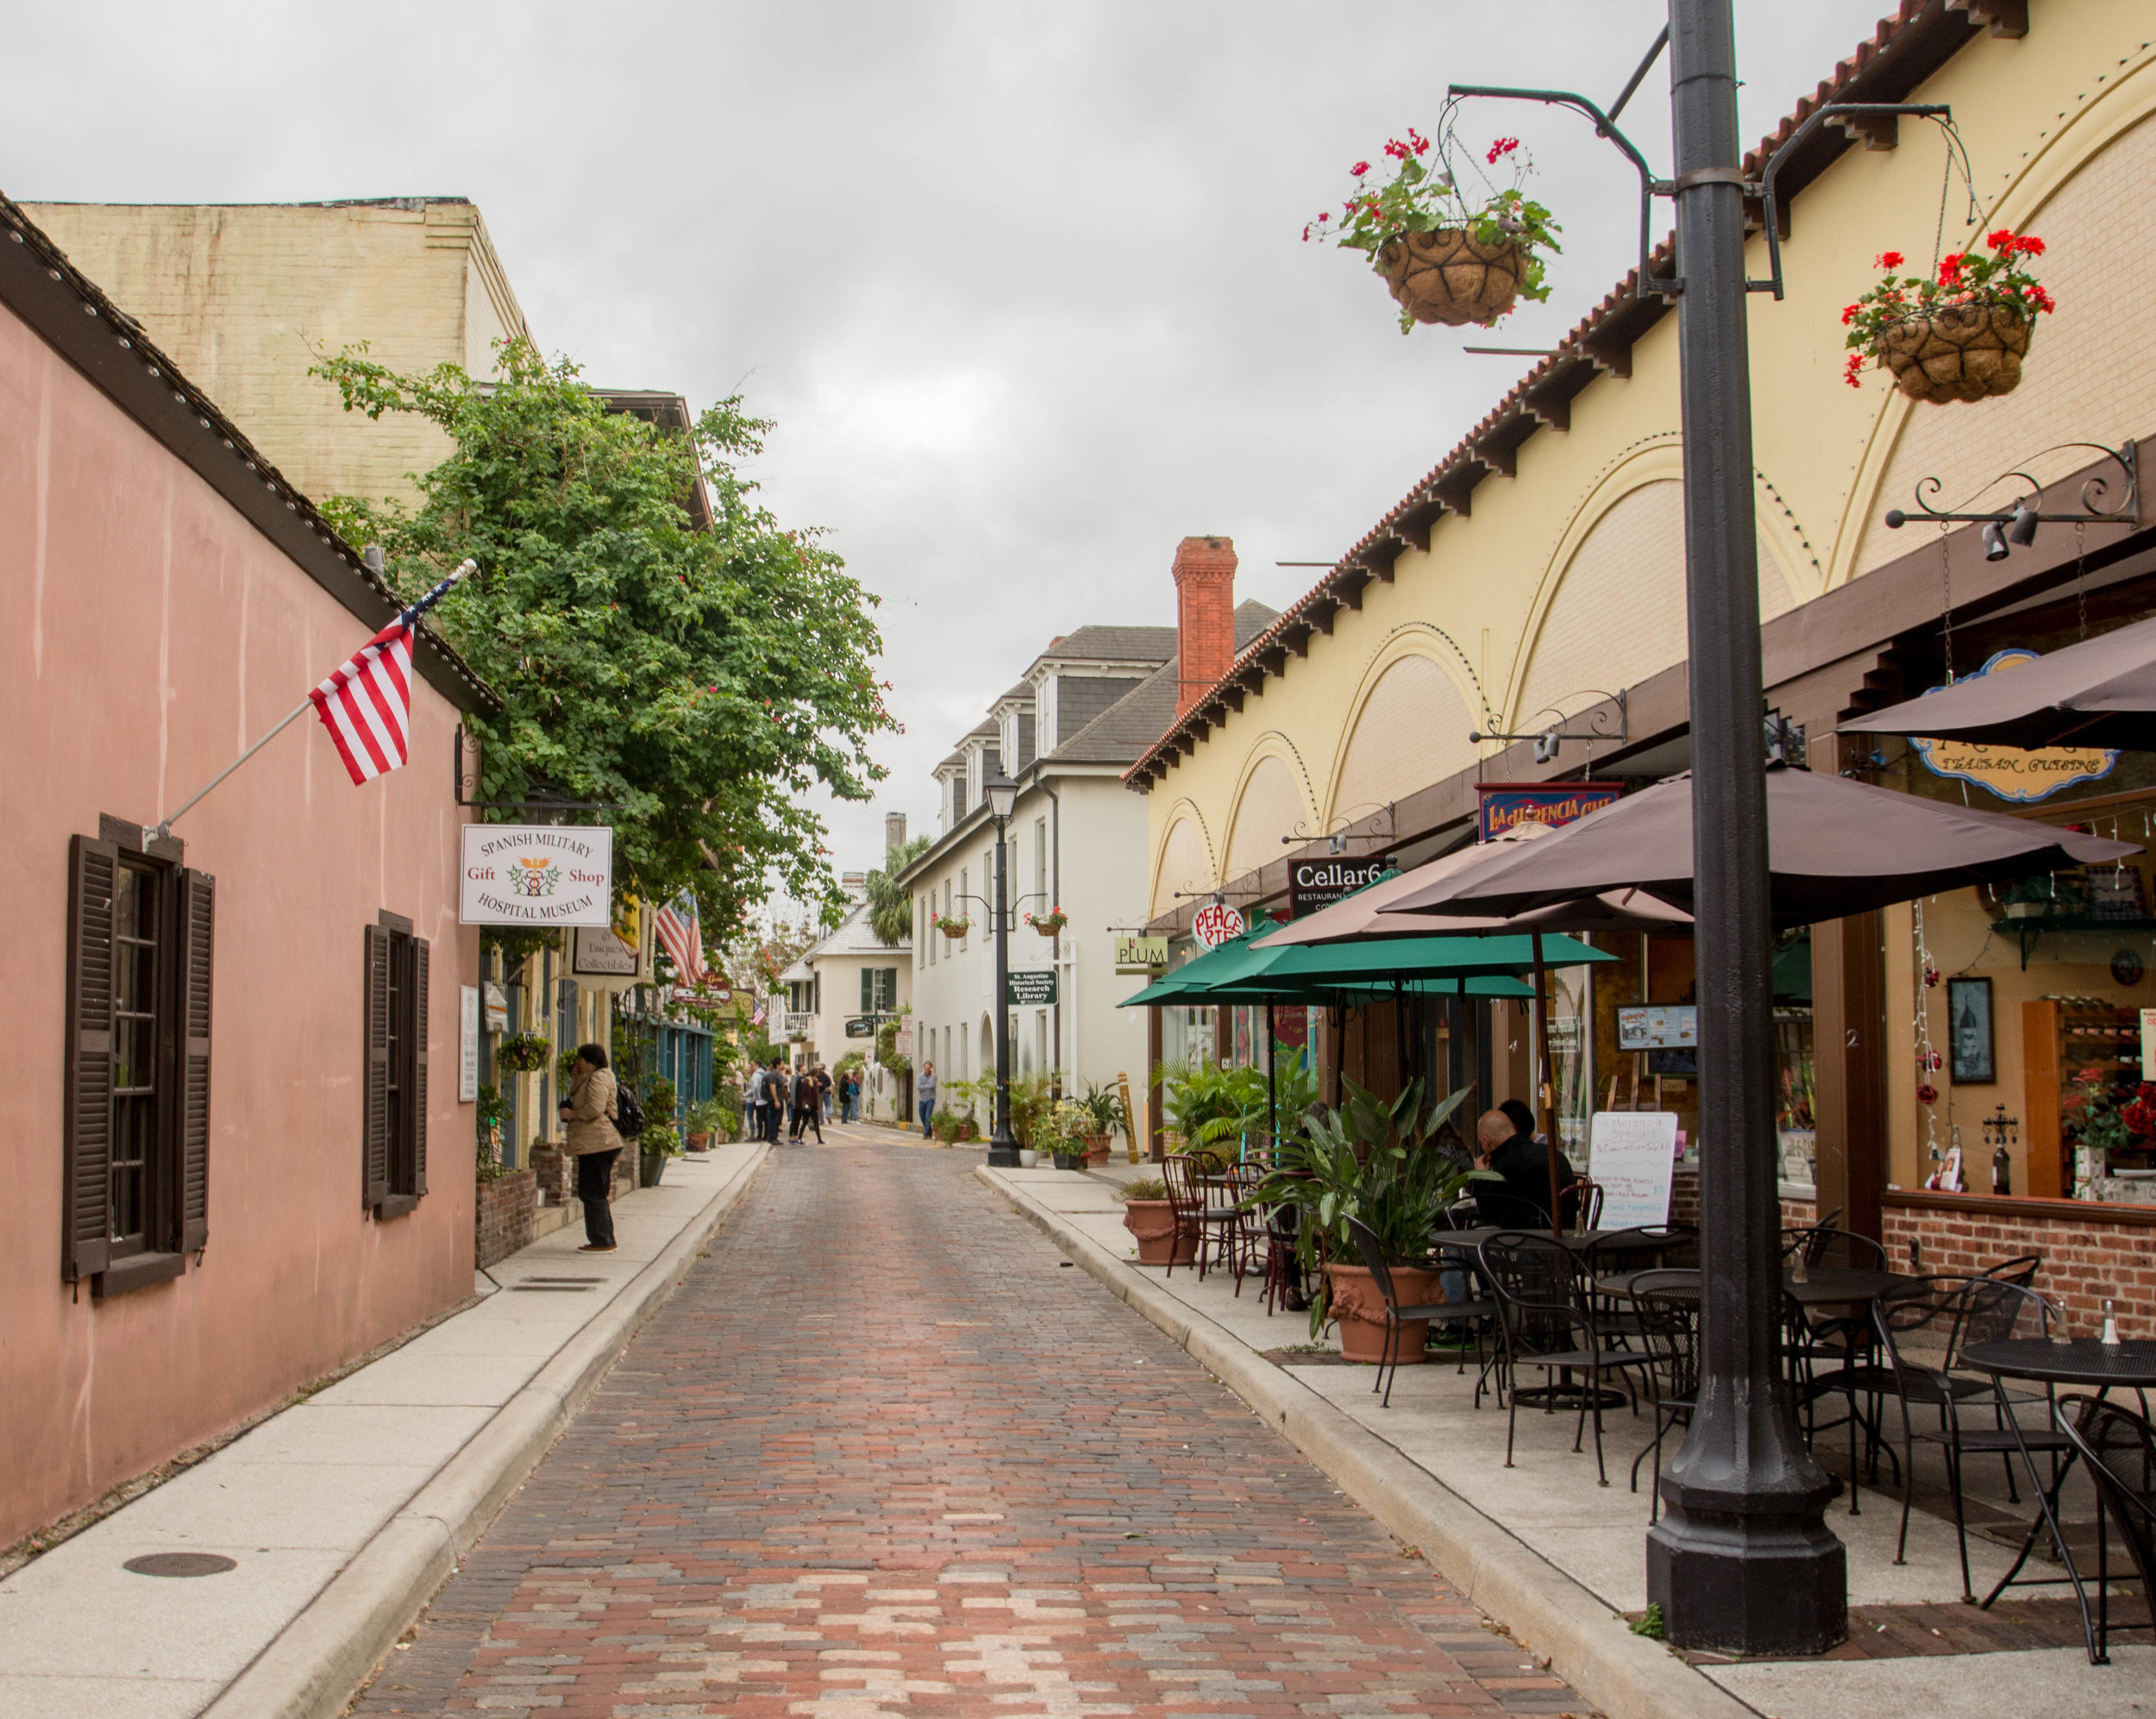  A stark contrast to State Road A1A, the streets in St. Augustine's historic center boast greenery, sidewalk cafes, brick roads, and ample shops. 